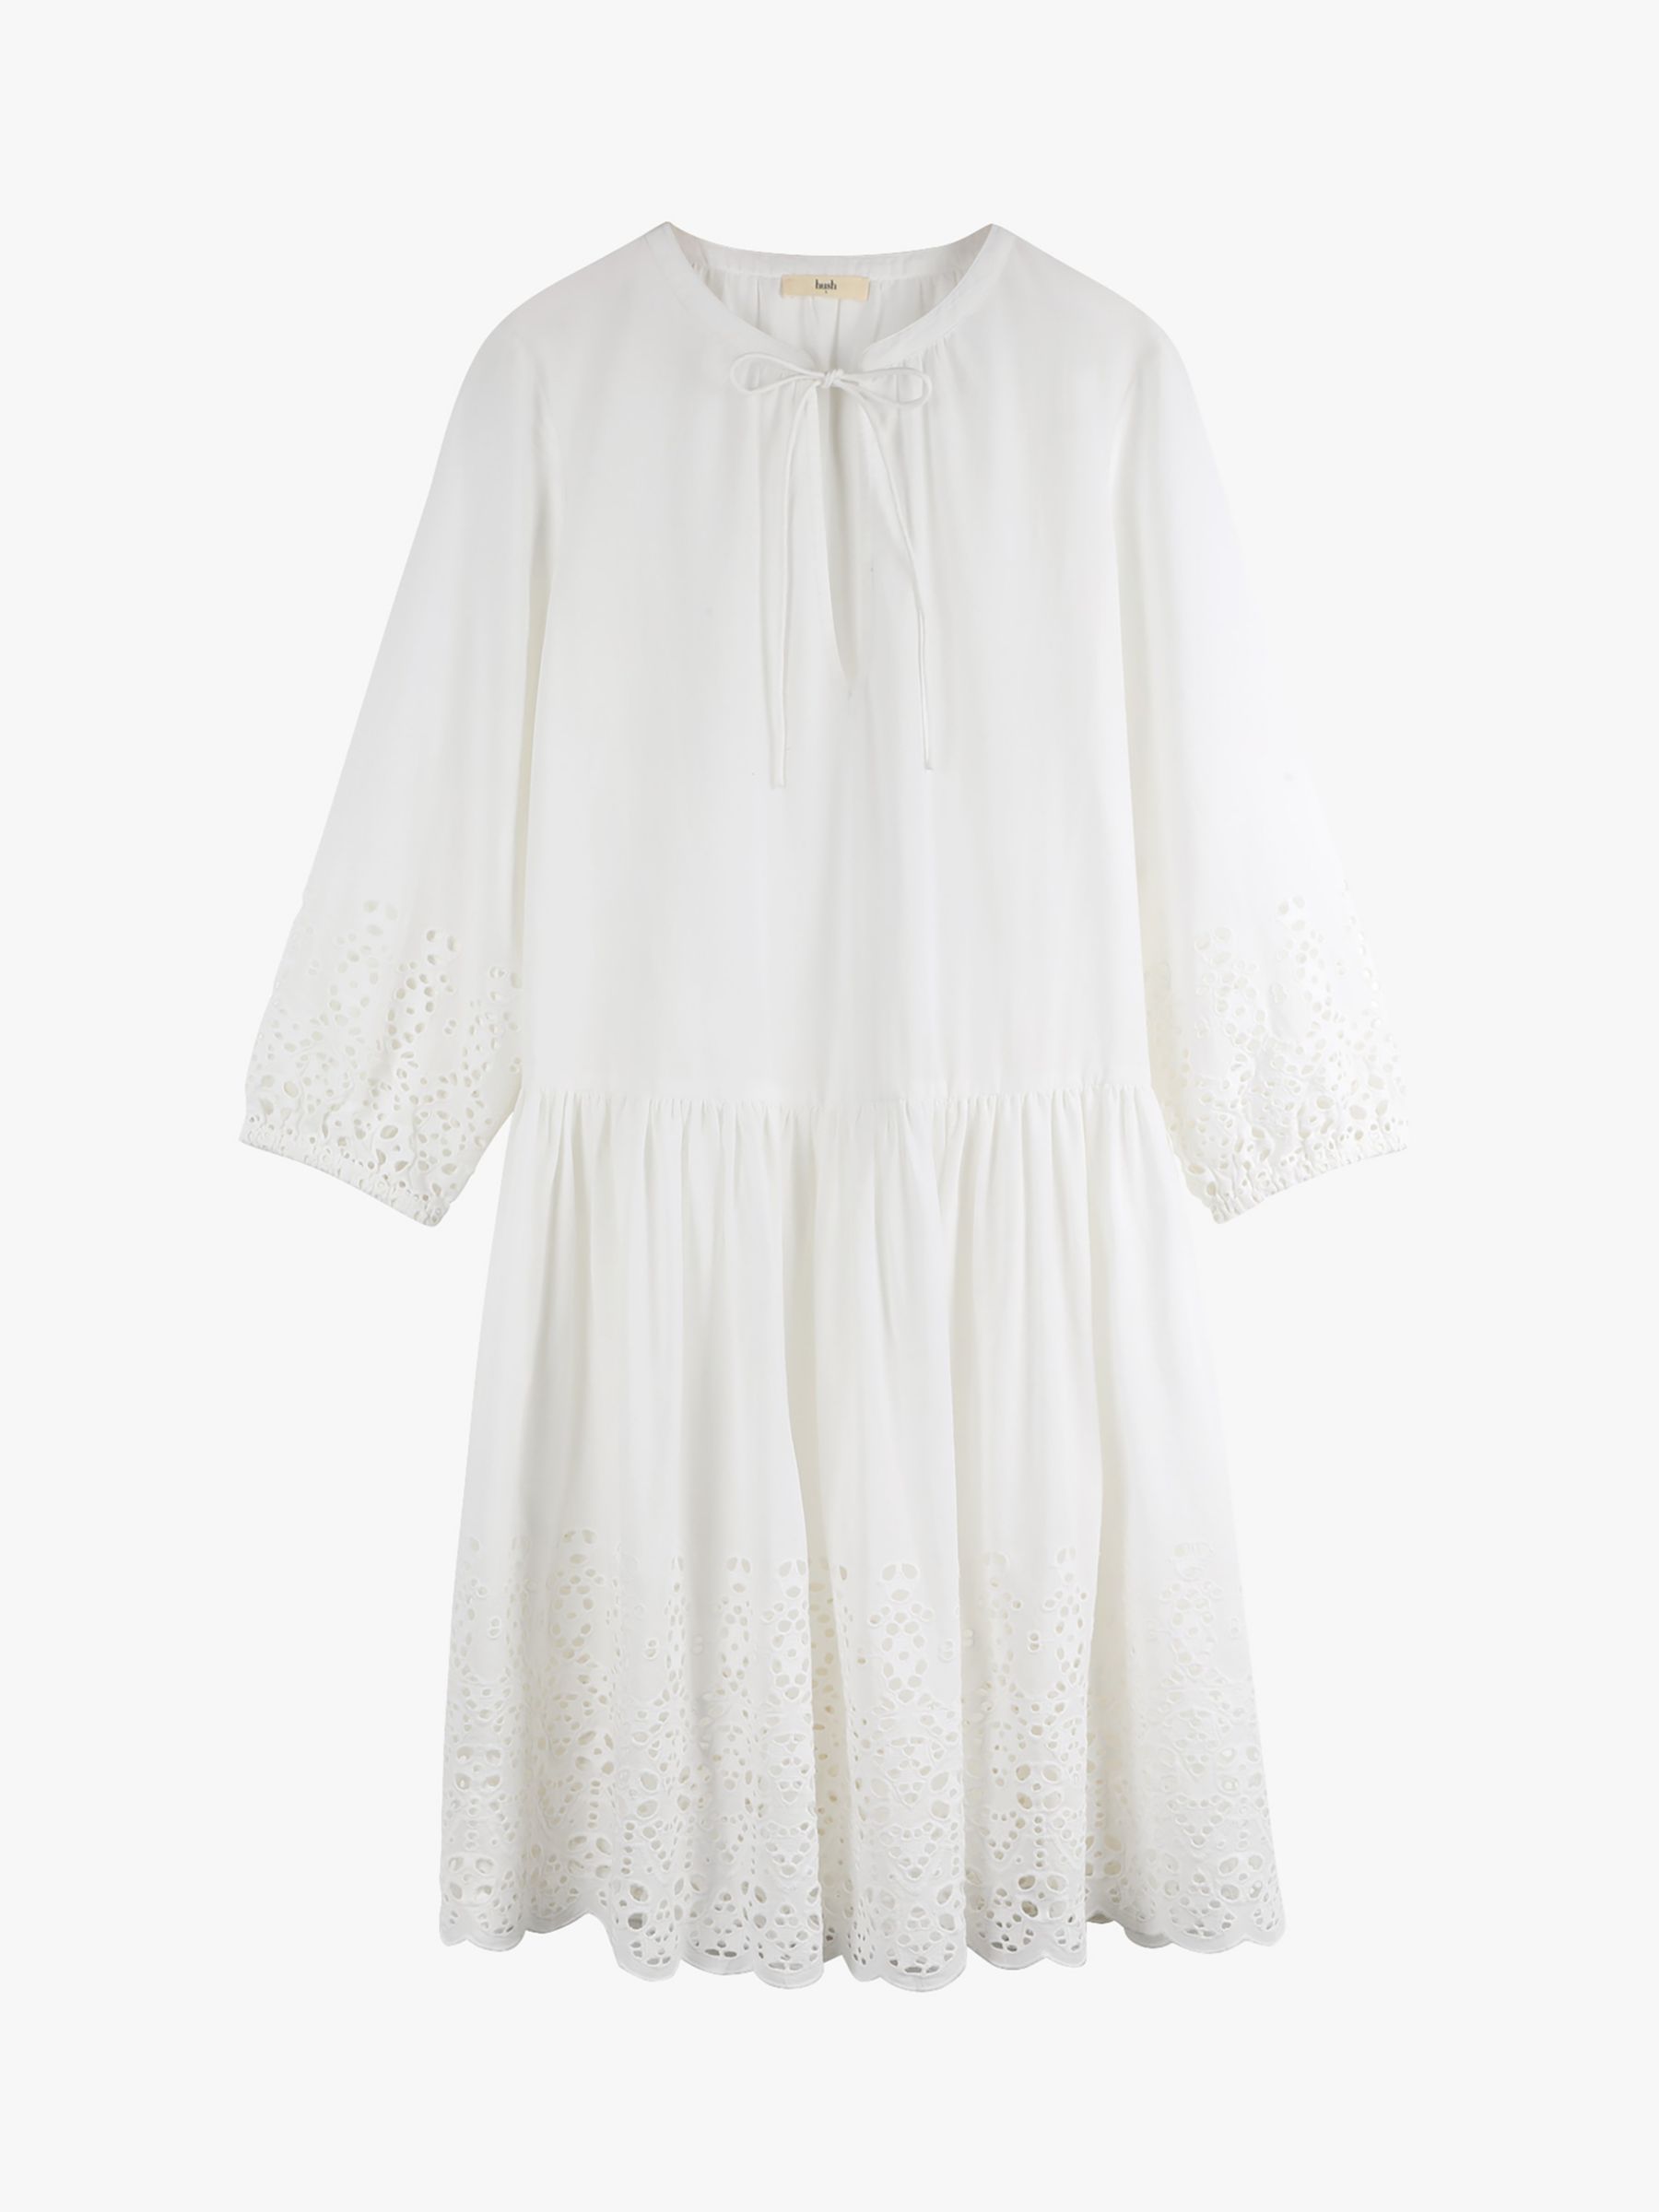 hush Cate Cotton Broderie Dress, White at John Lewis & Partners